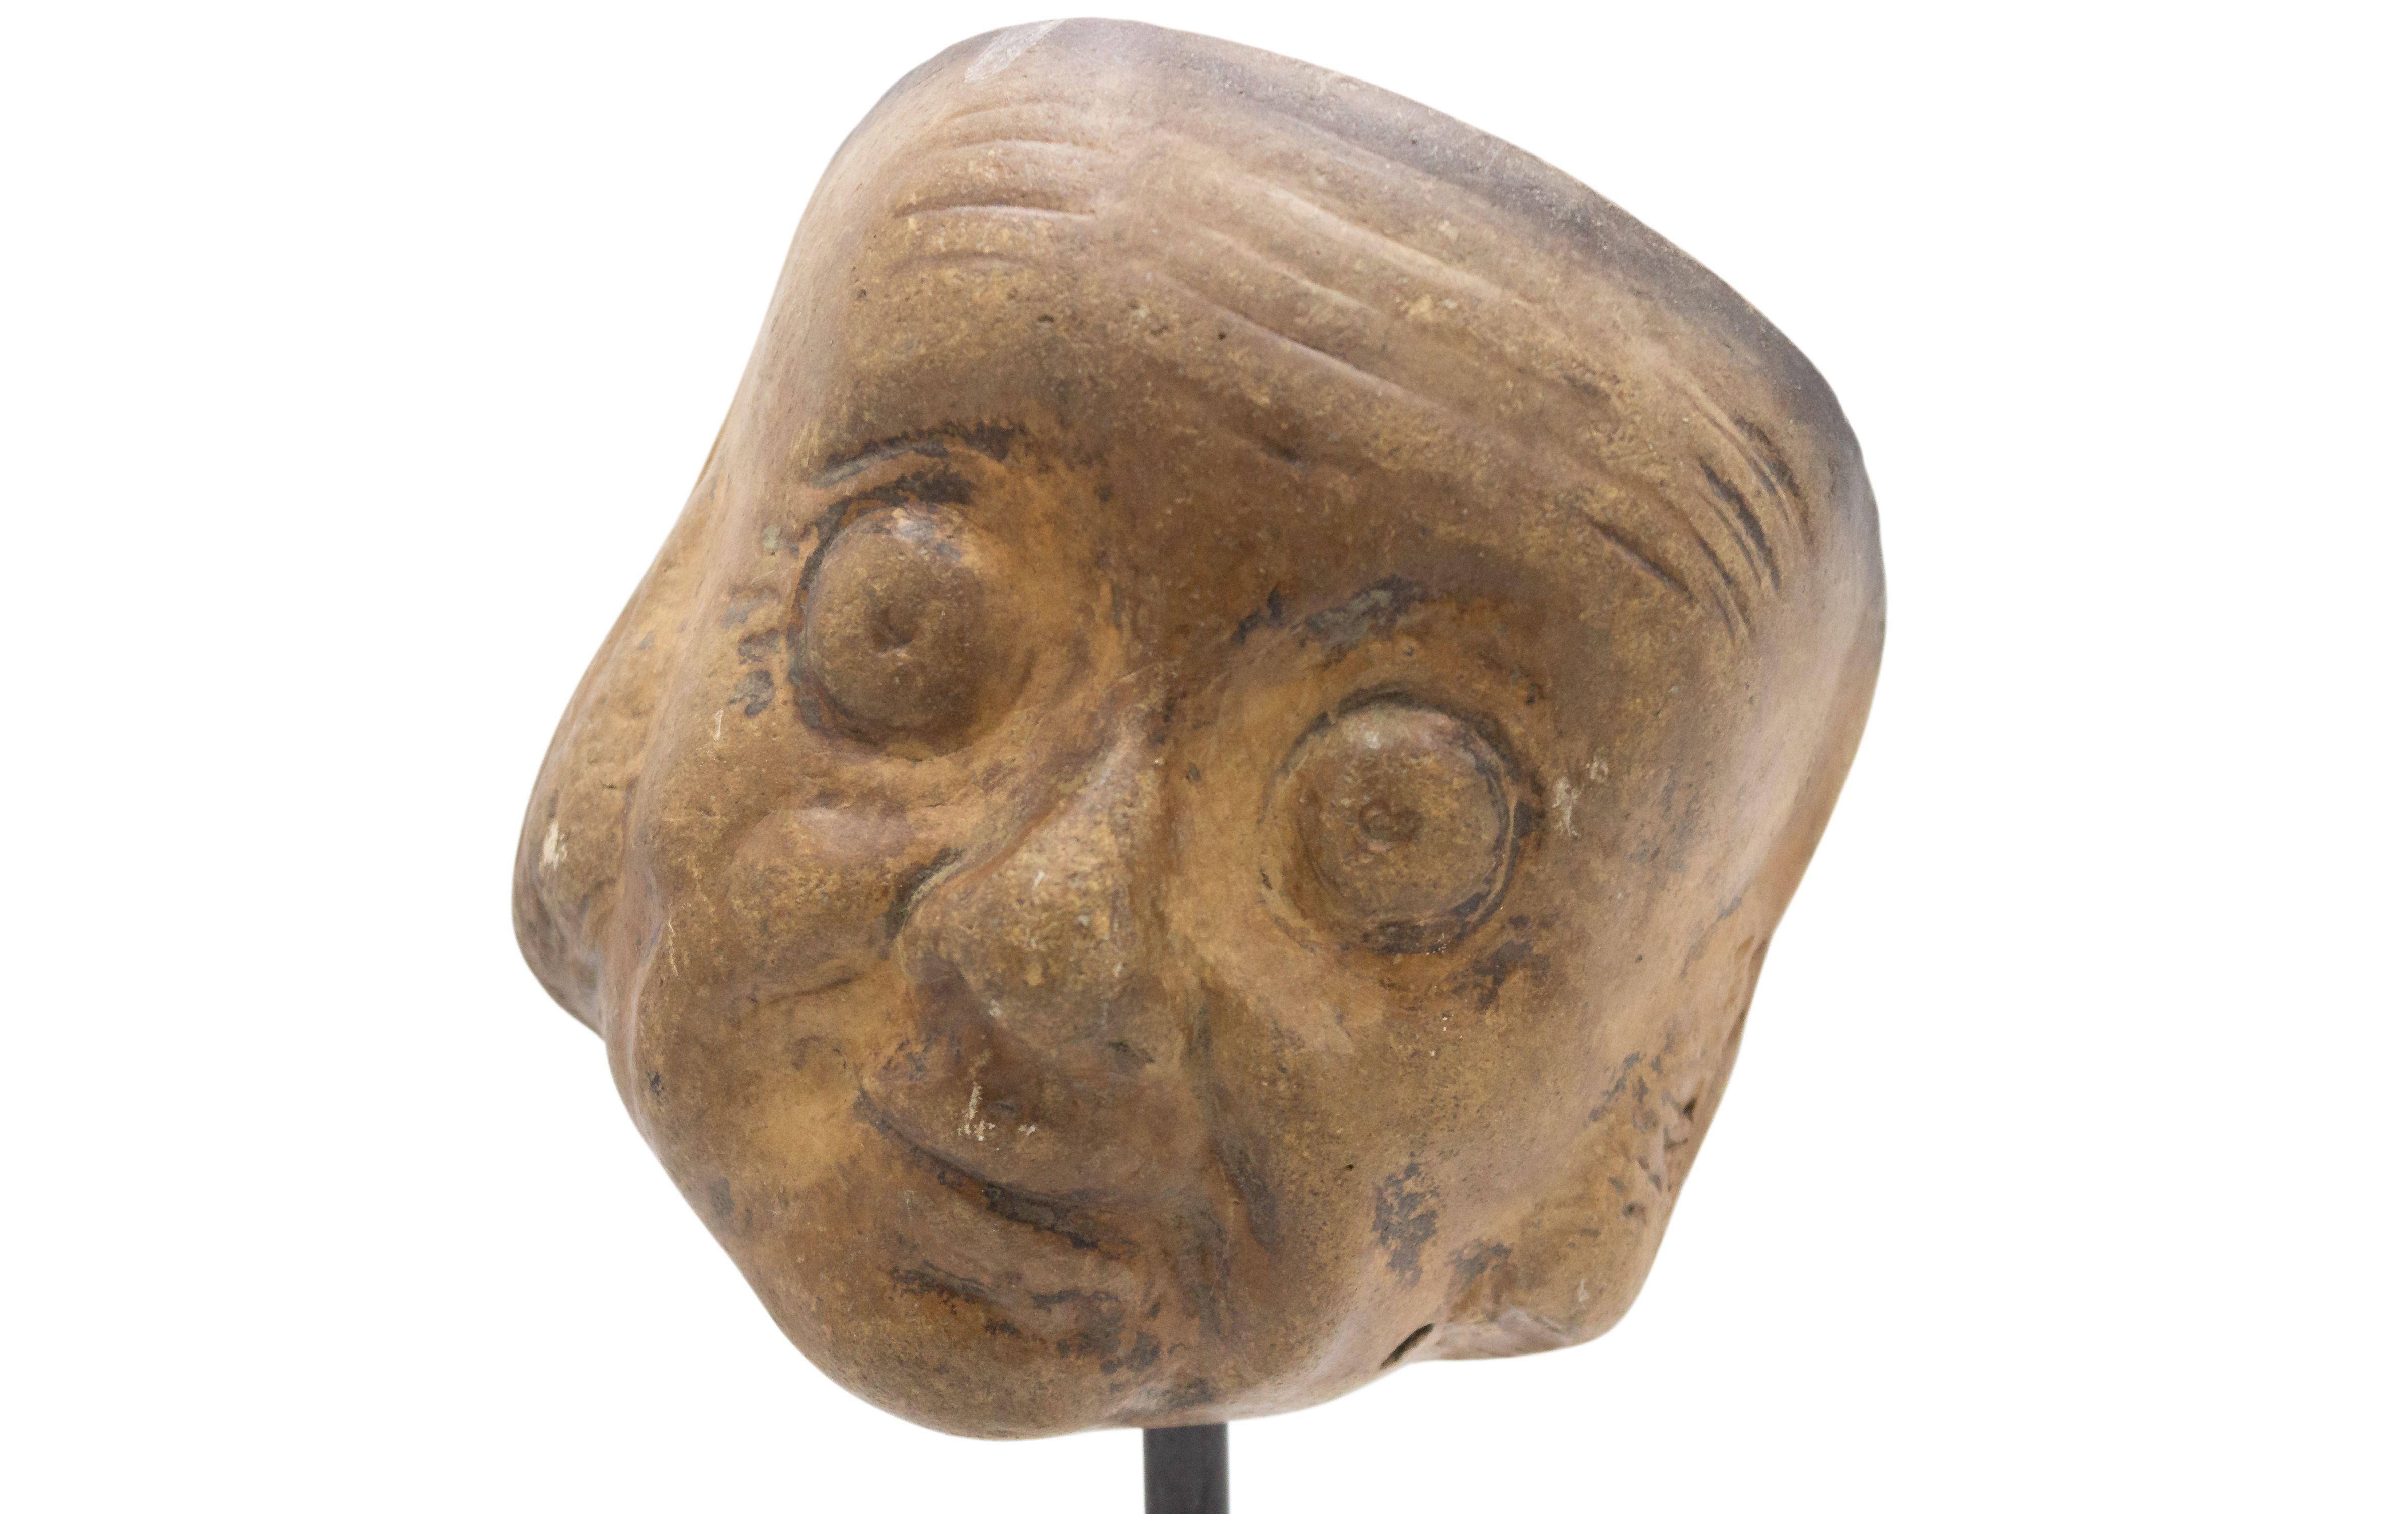 Continental German (late 19th Cent) sculpted terra-cotta master mask mold of a small google-eyed Grotesque face with a slight smile displayed on a square black marble base stand (part of a 39 piece collection).
 